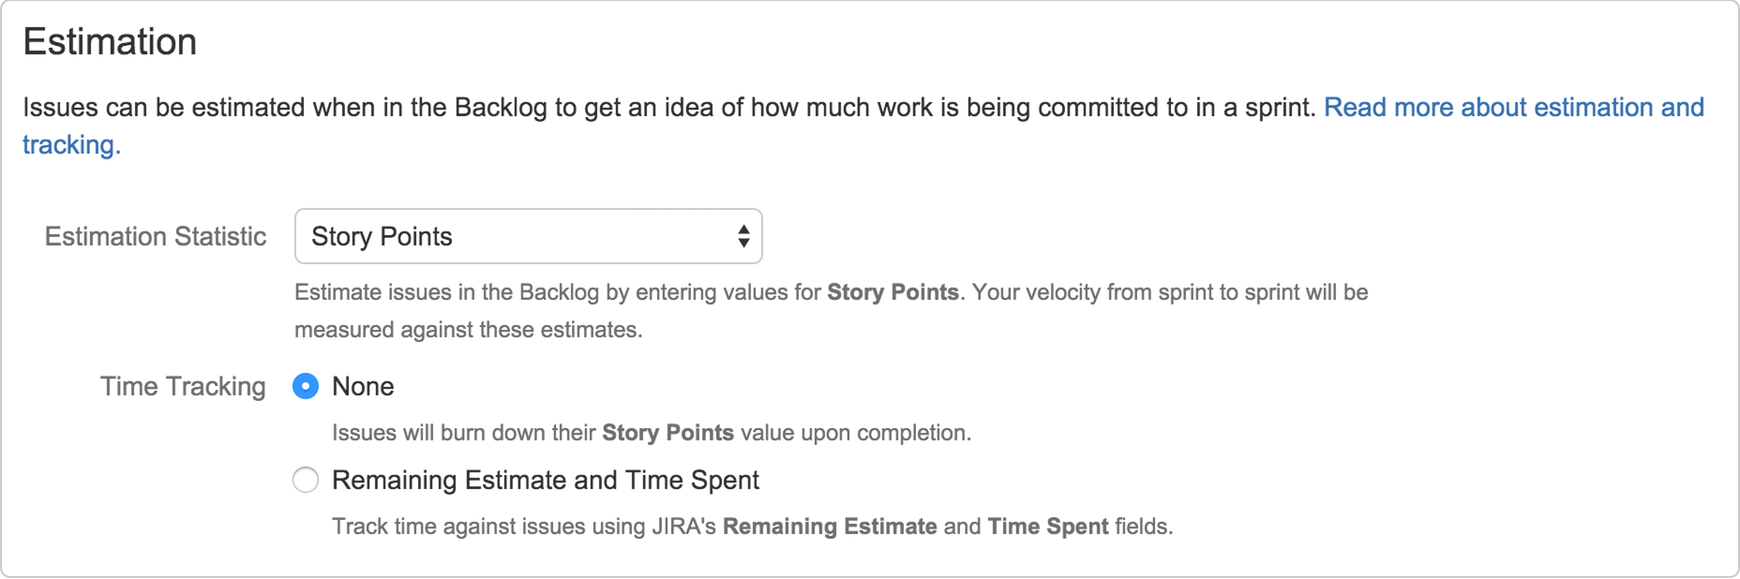 Estimation section. Estimation Statistic is set to Story Points, and Time Tracking to None.